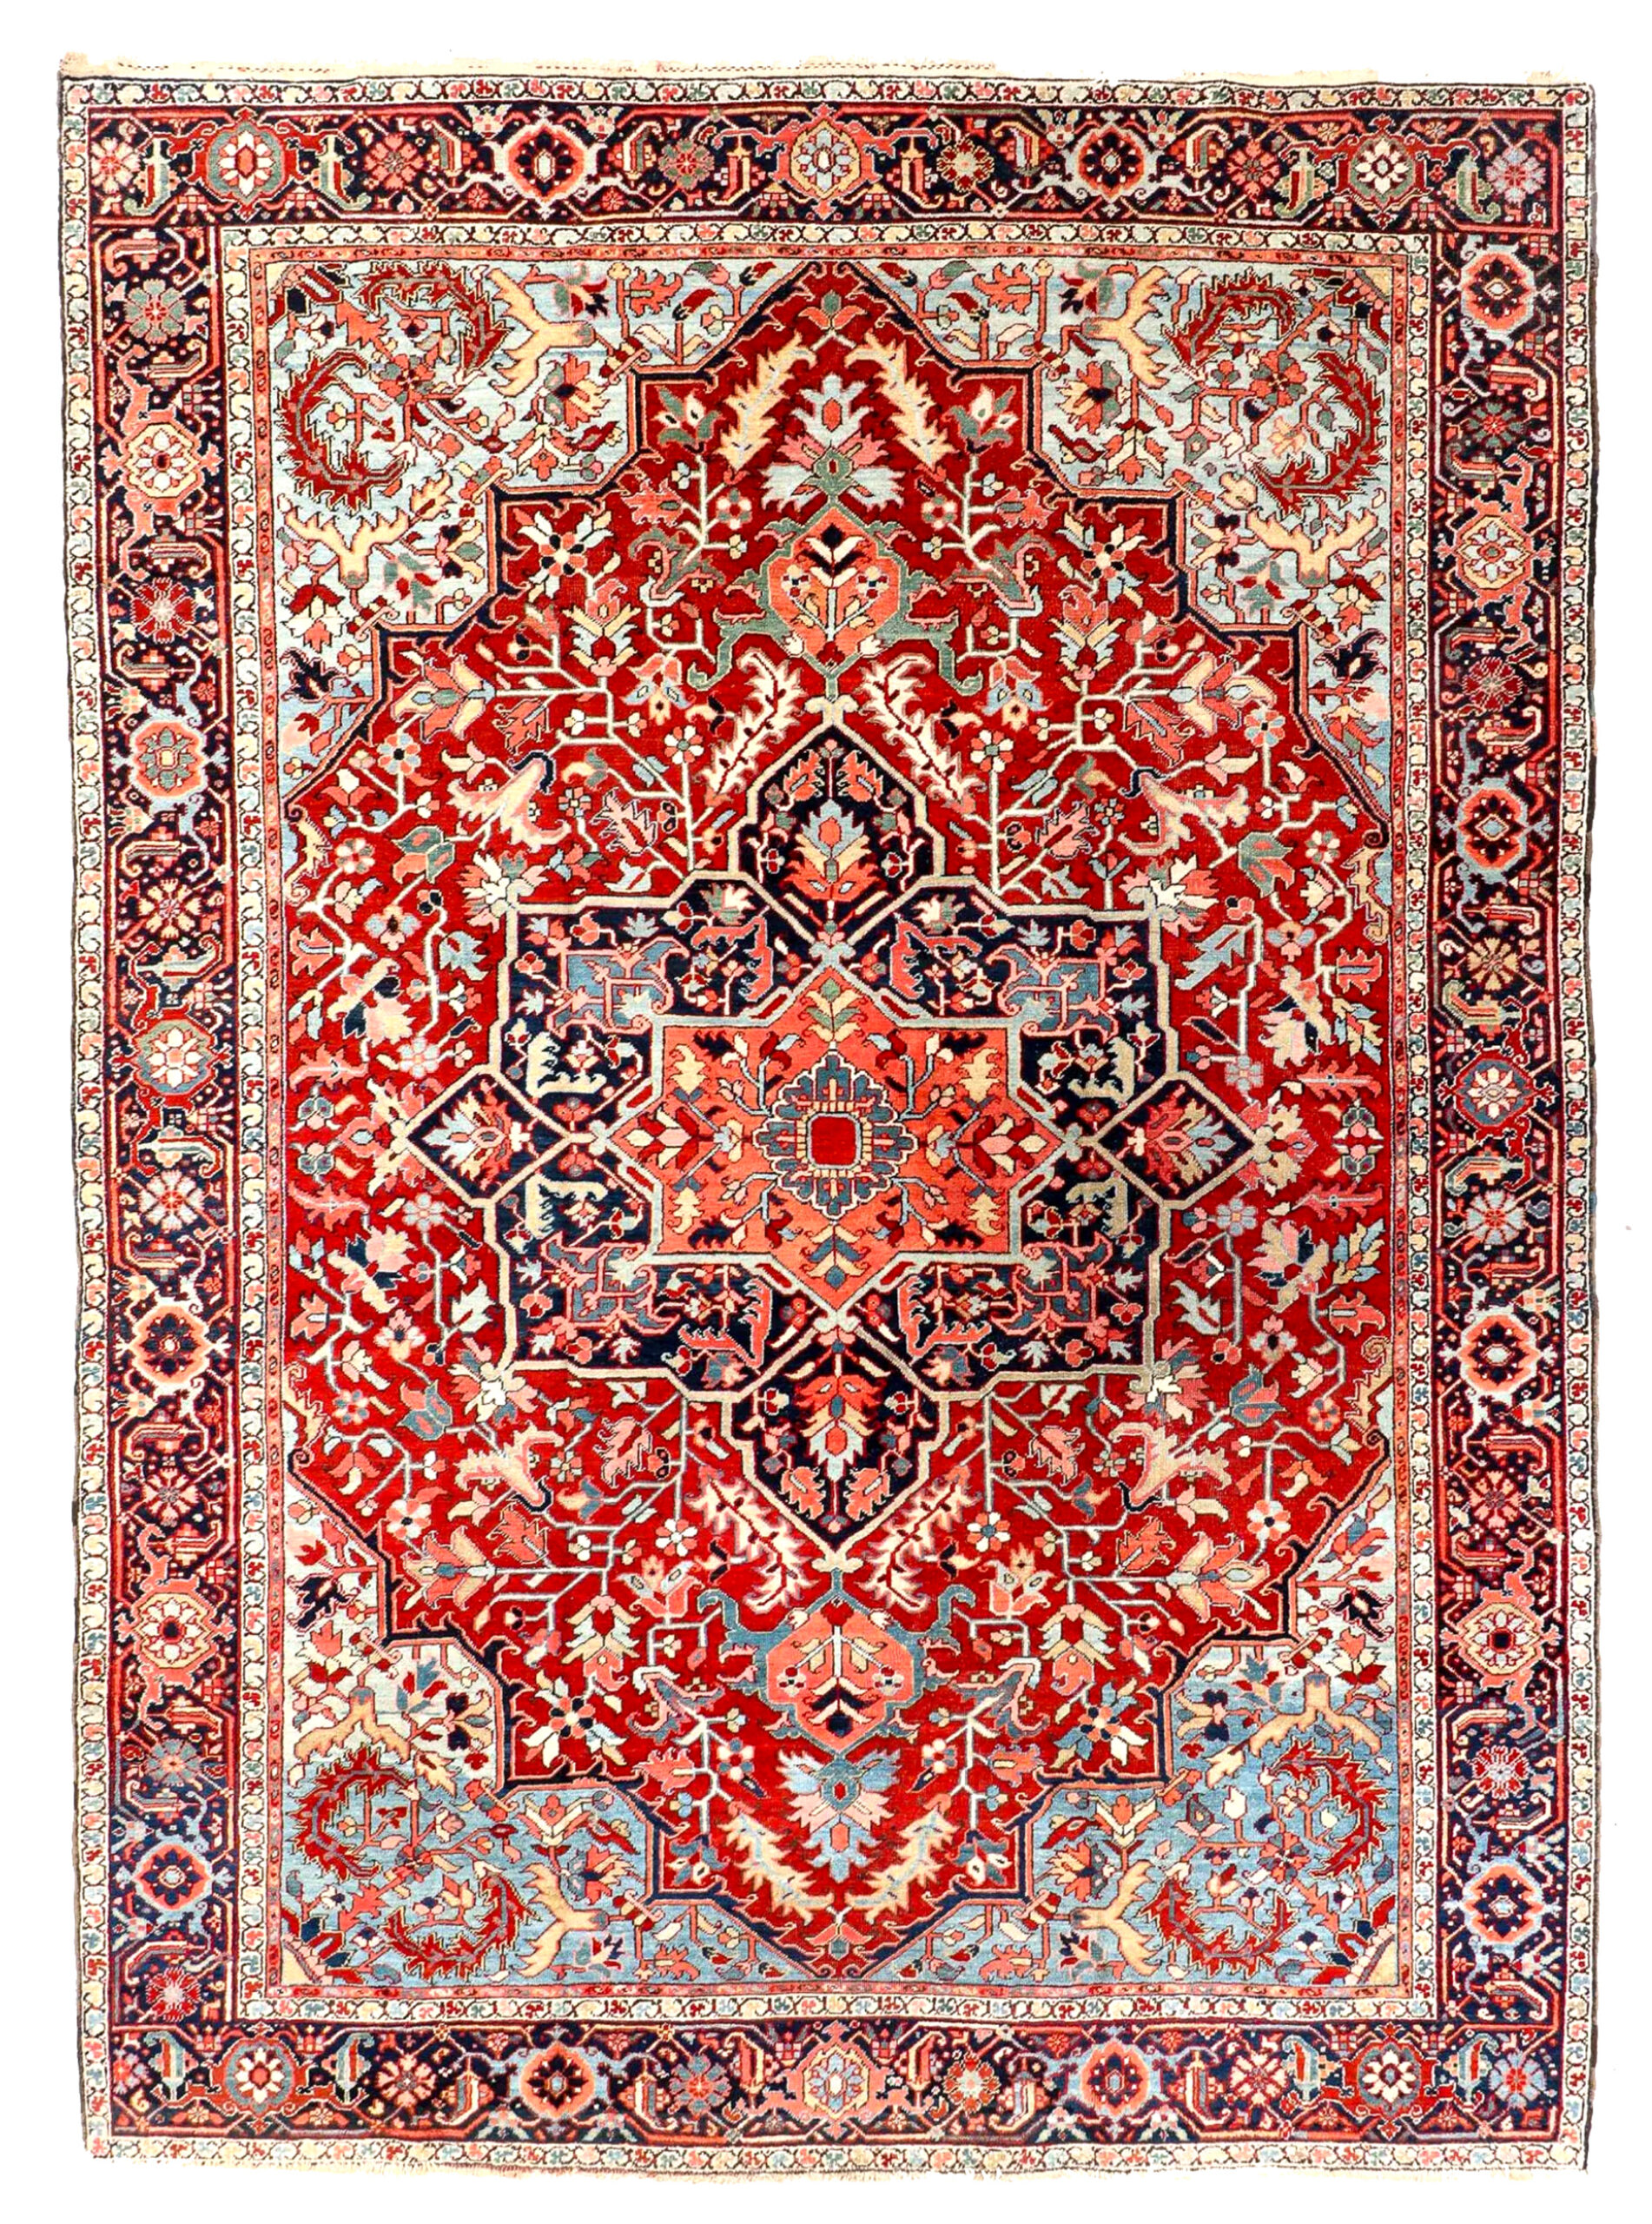 Antique Persian Heriz carpet with a bric red field and sy blue corner spandrels - Douglas Stock Gallery, Oriental rugs Boston,MA area New England